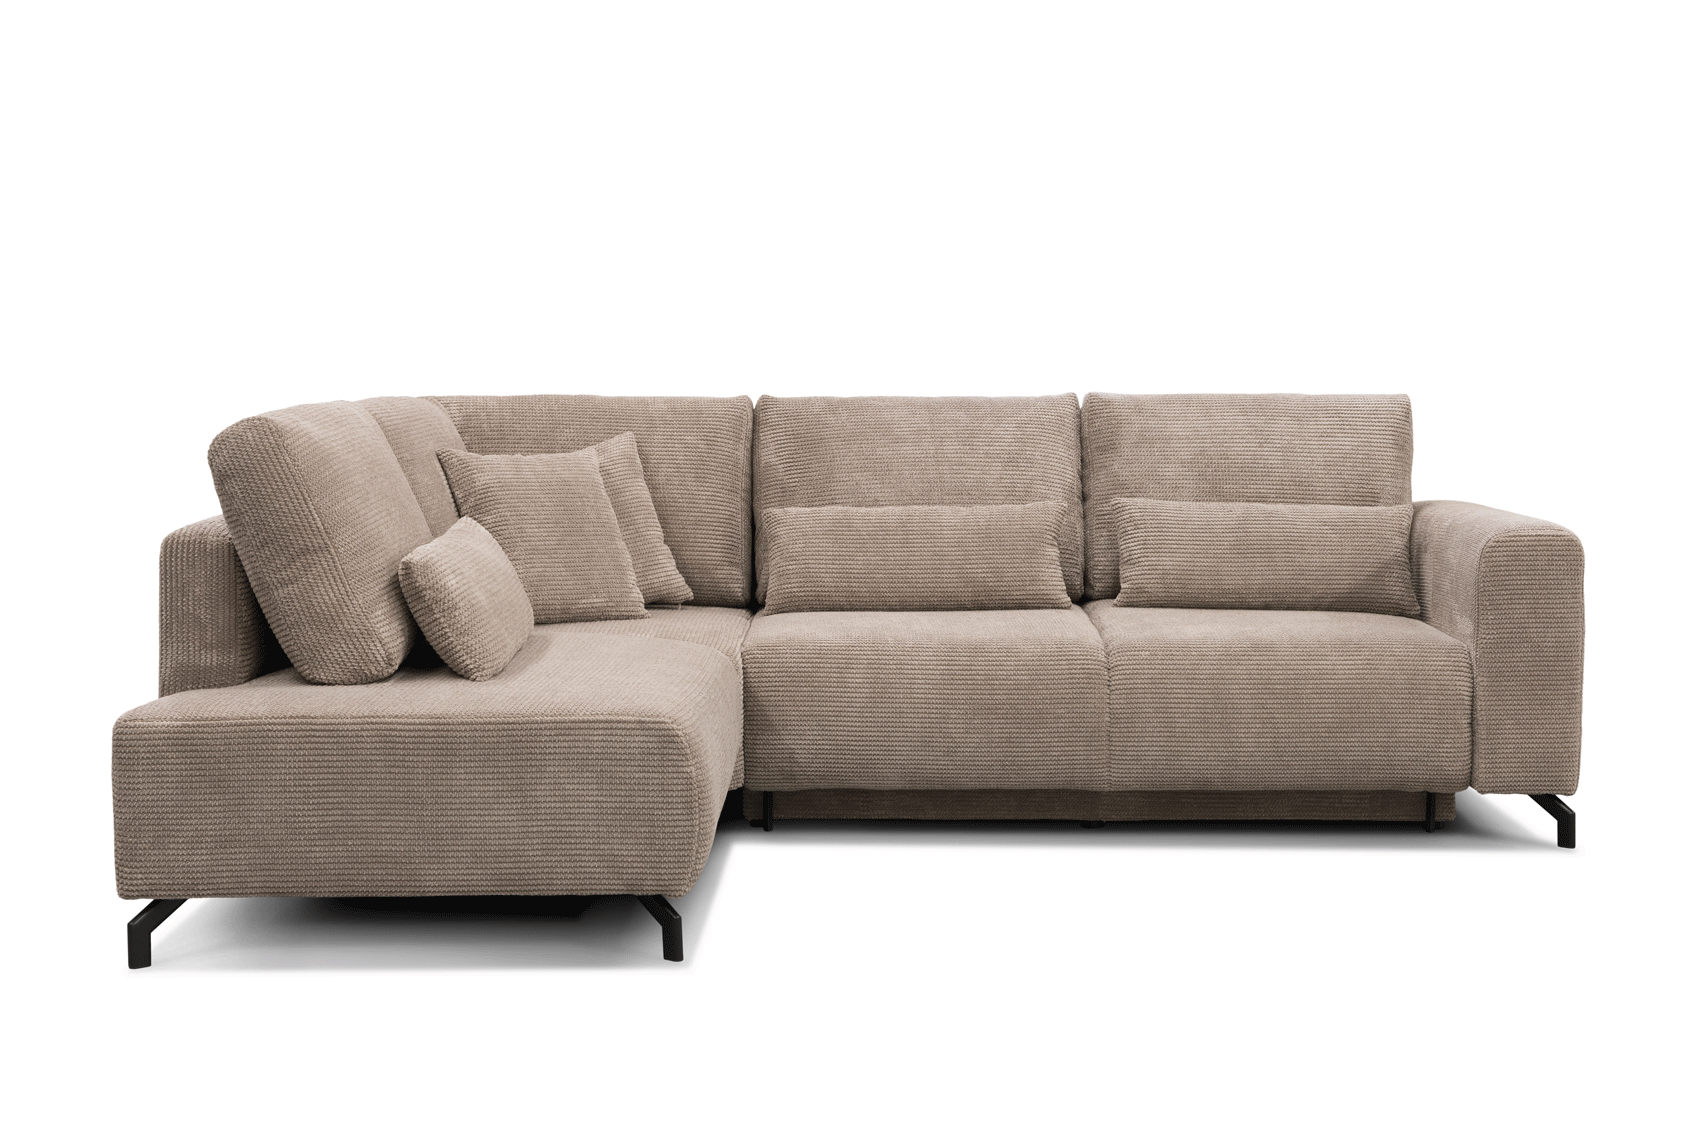 Brands Modern Living Room, Poland Divo Sectional w/bed